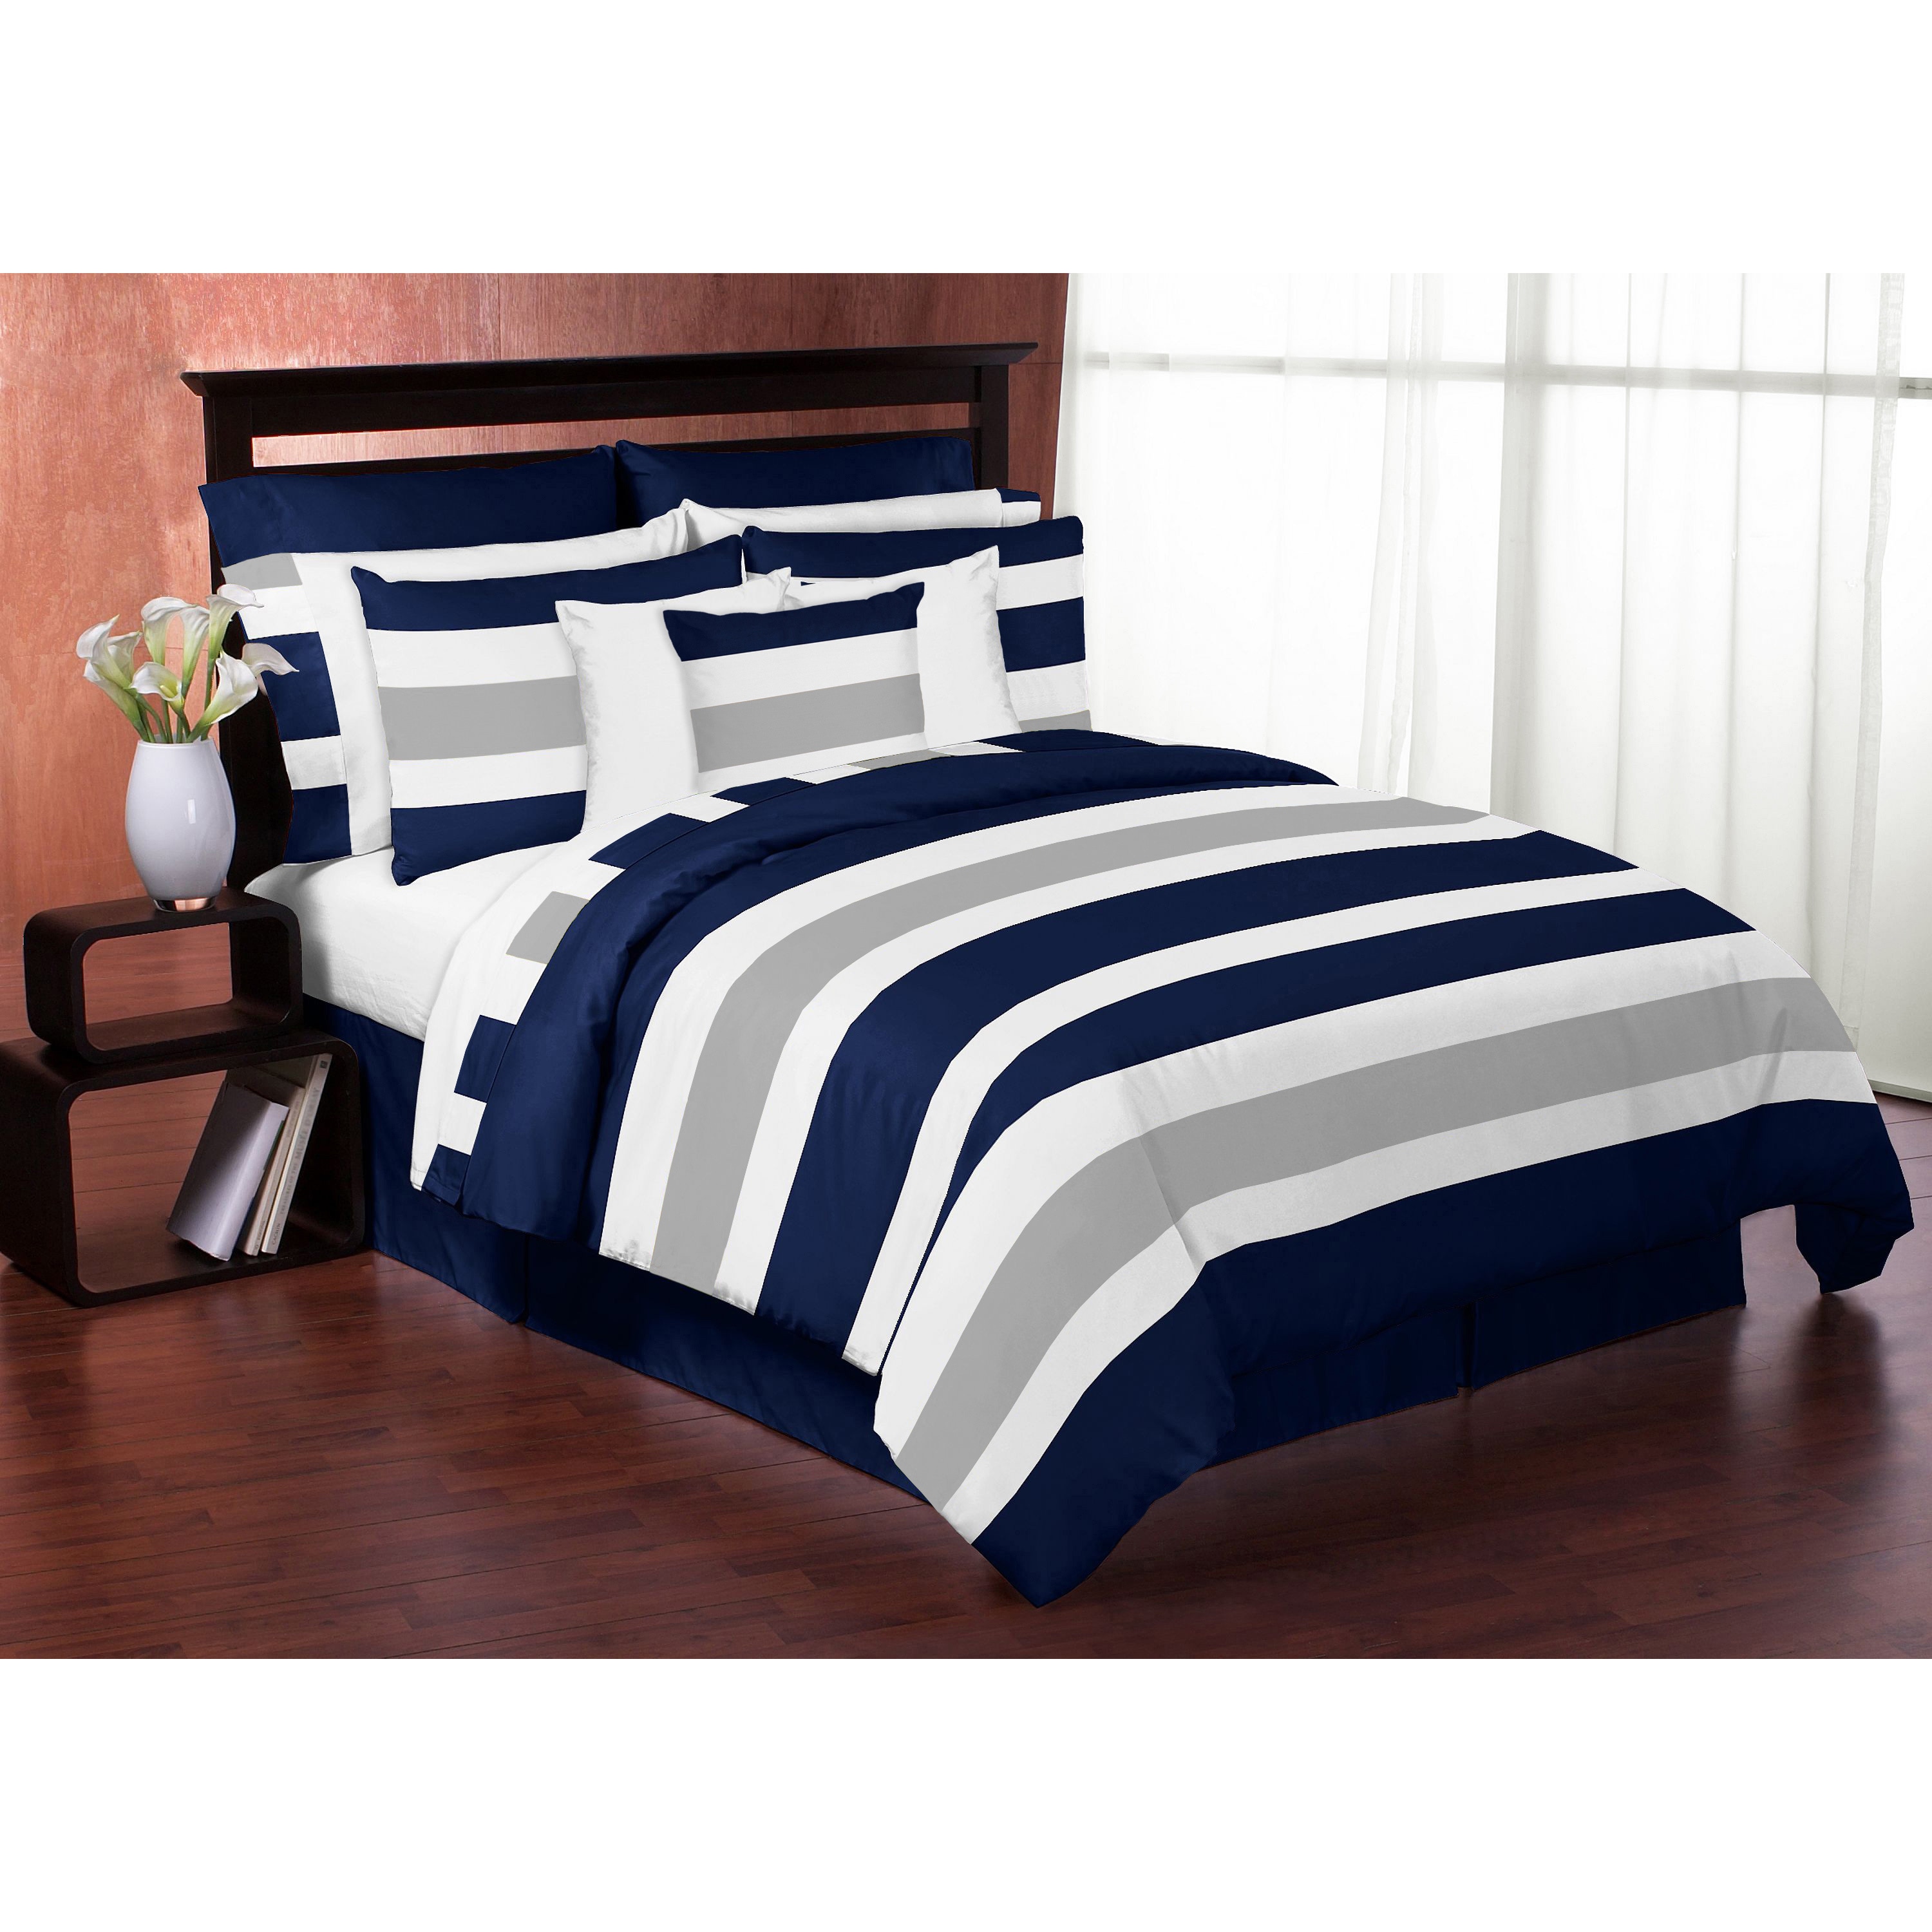 queen size bedding sheets